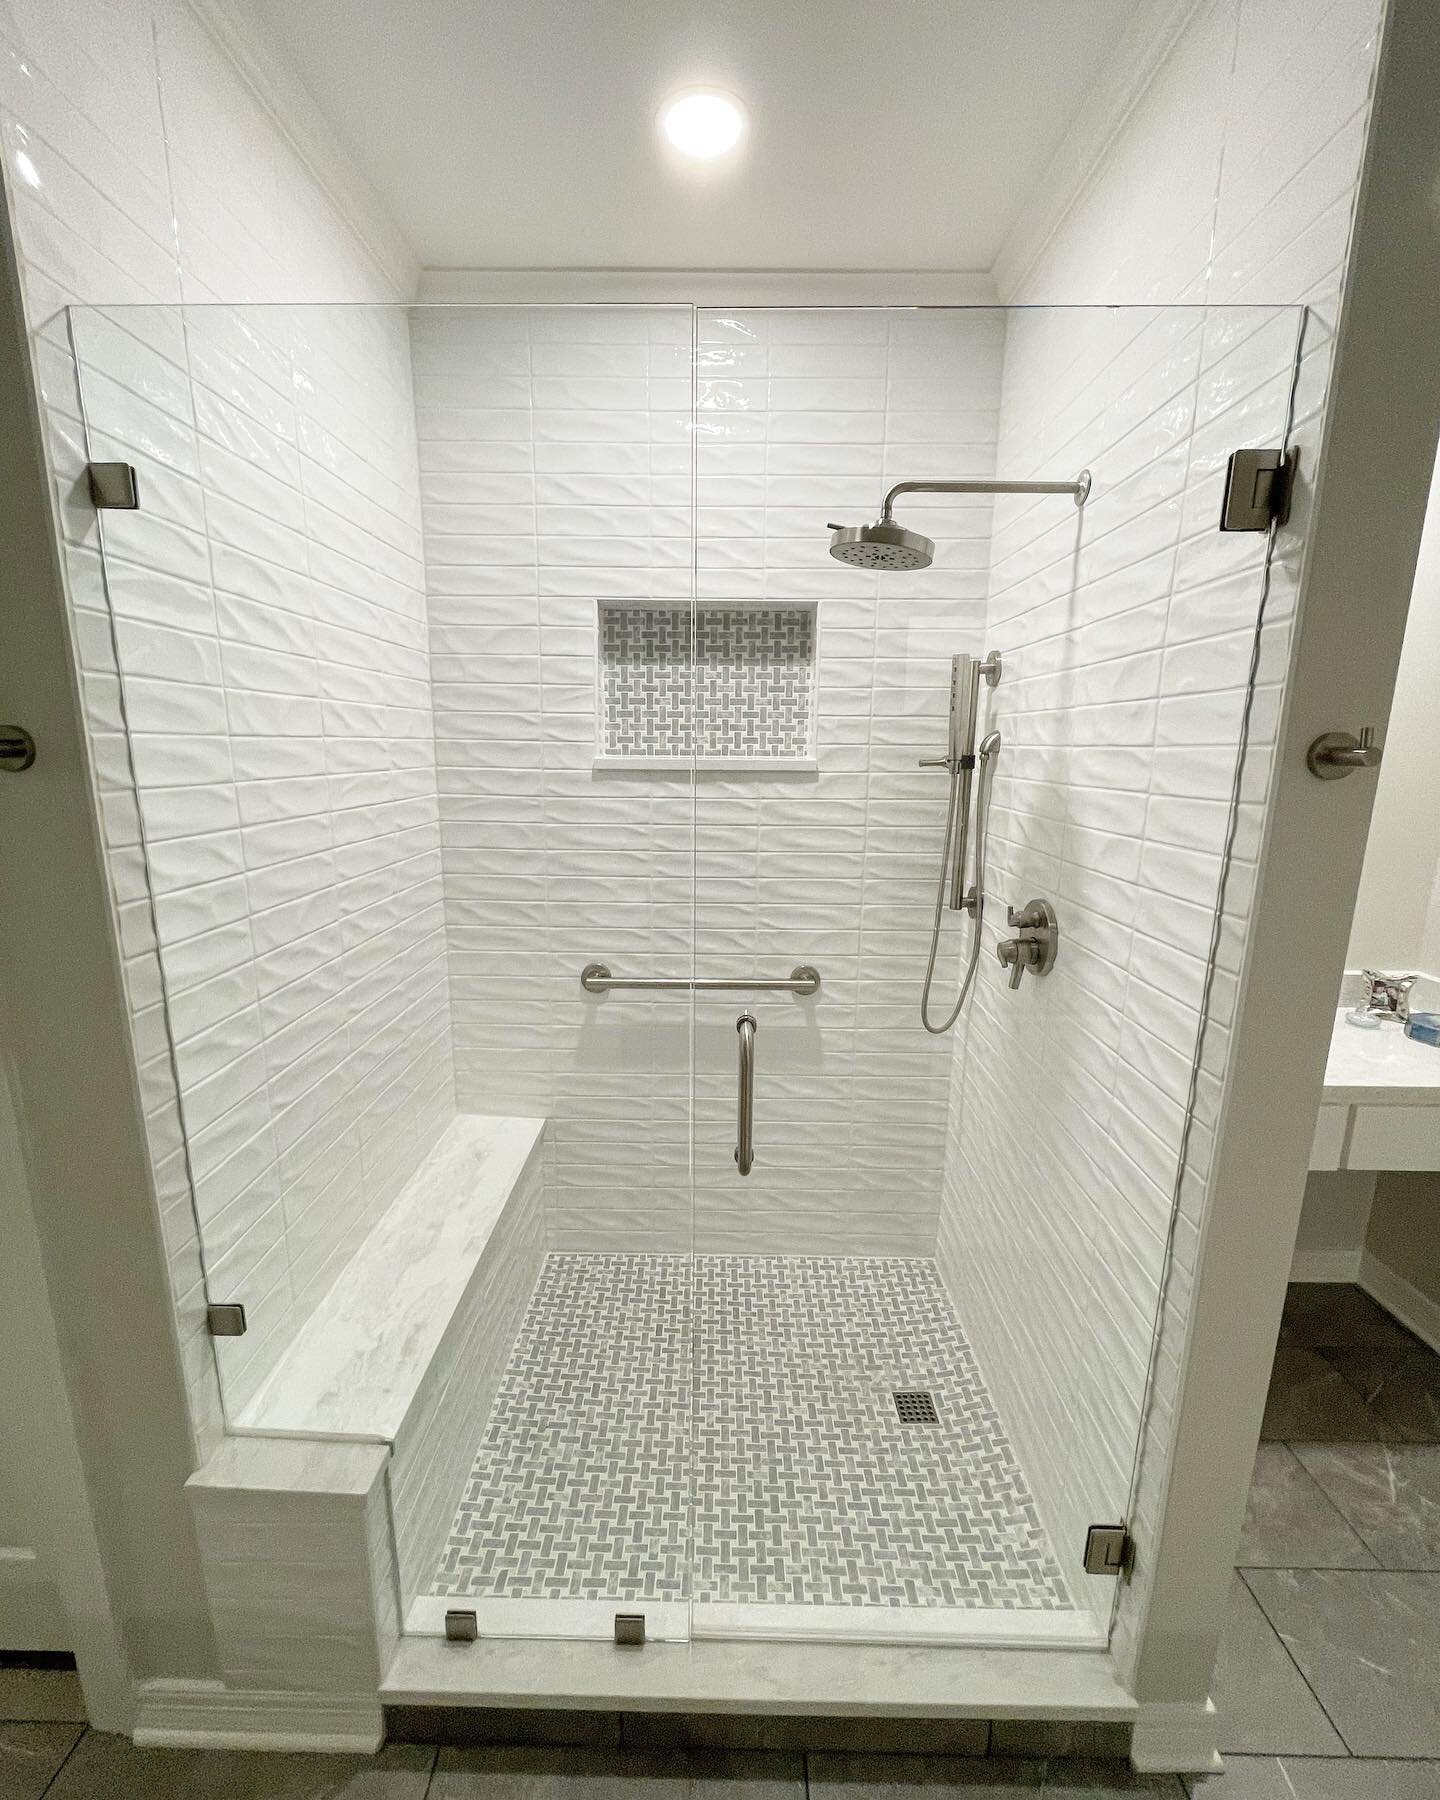 This shower is ready for it&rsquo;s close up!
&bull;
Truly enjoyed renovating this bathroom for such amazing people. Couldn&rsquo;t have asked for better customers!
&bull;
#maxwellrenovations #bathroom #shower #bathroomdesign #bathroomremodel #bathro